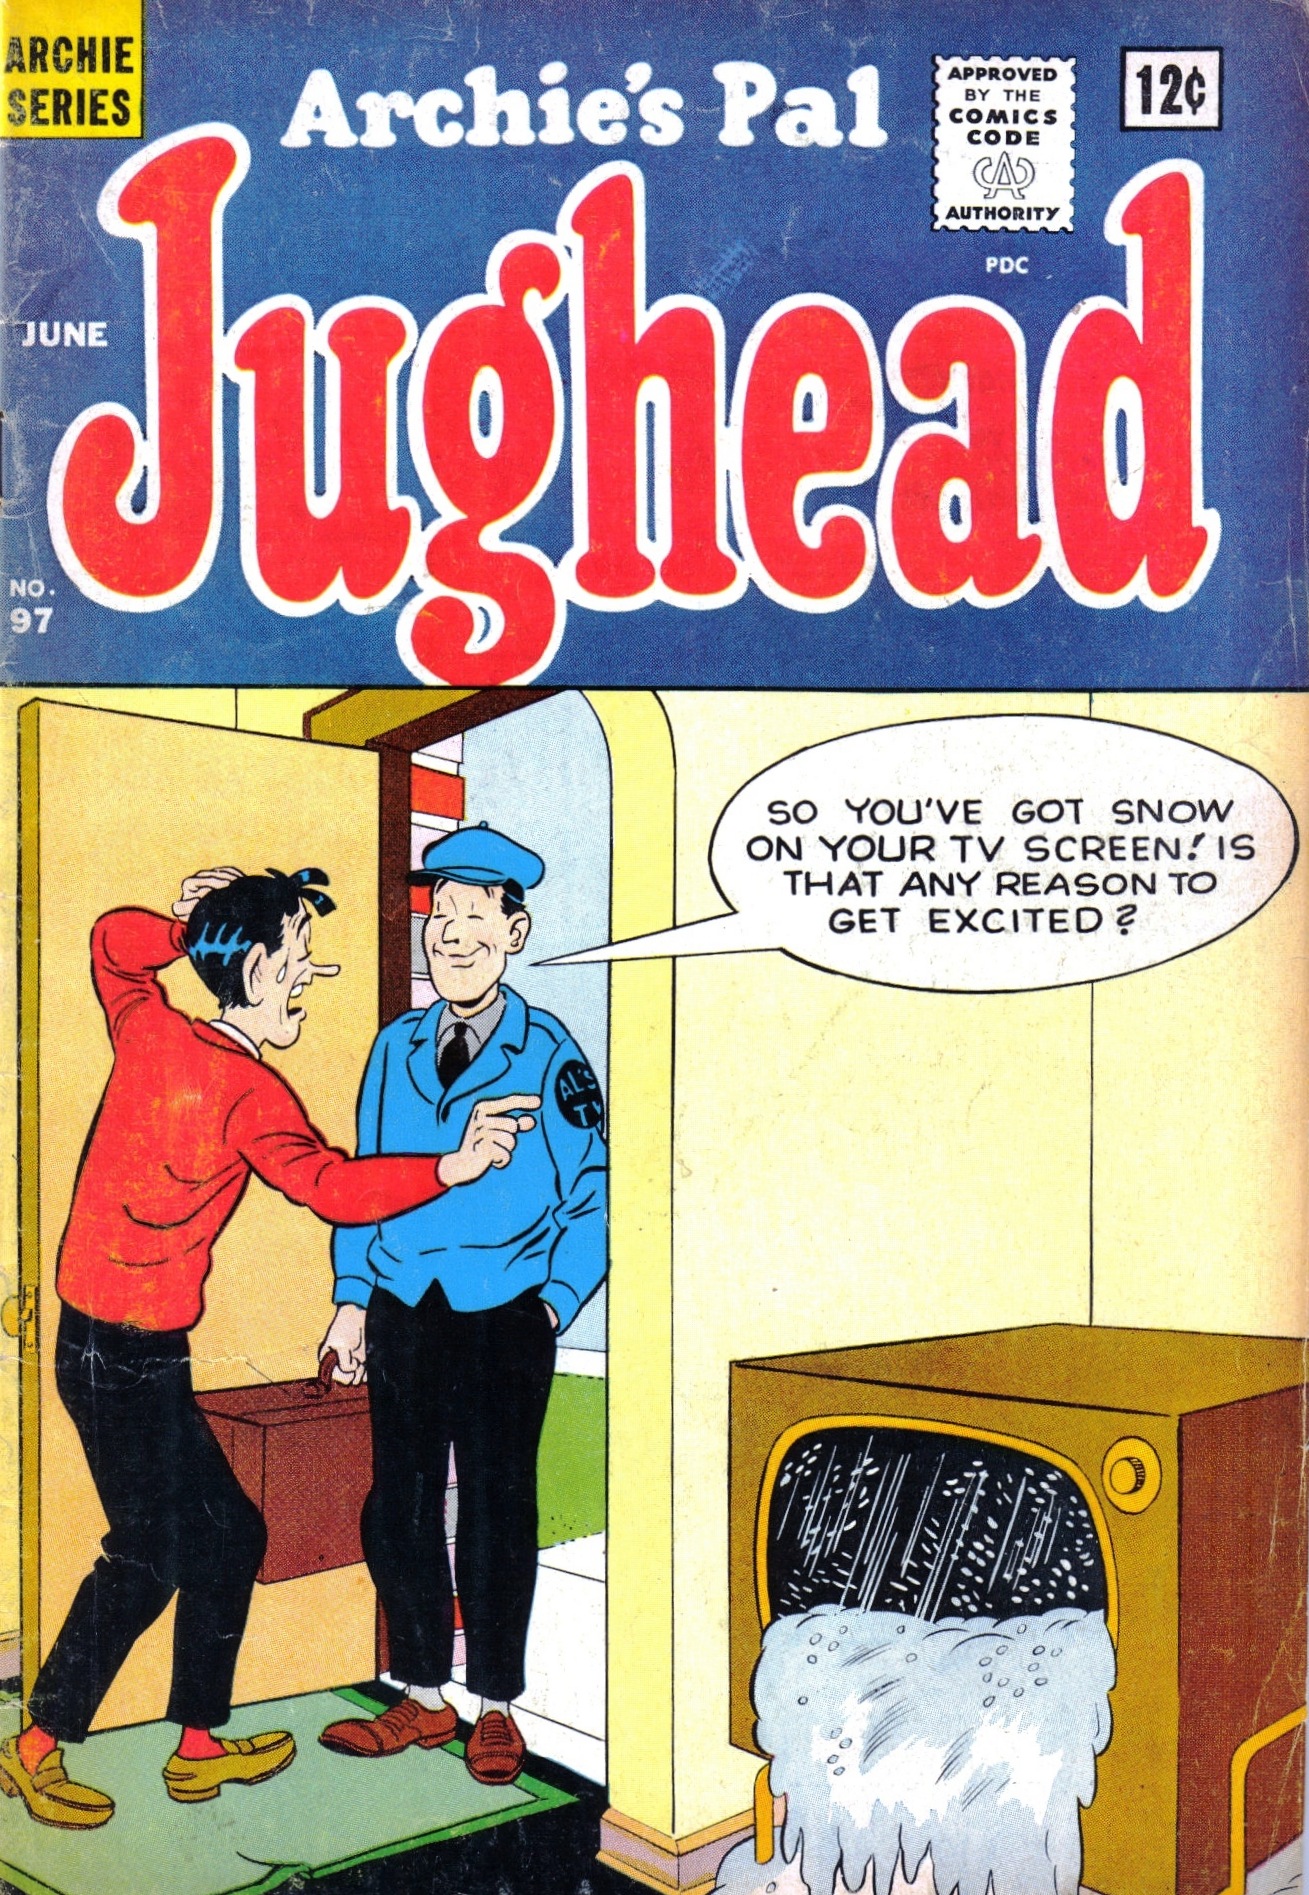 Read online Archie's Pal Jughead comic -  Issue #97 - 1